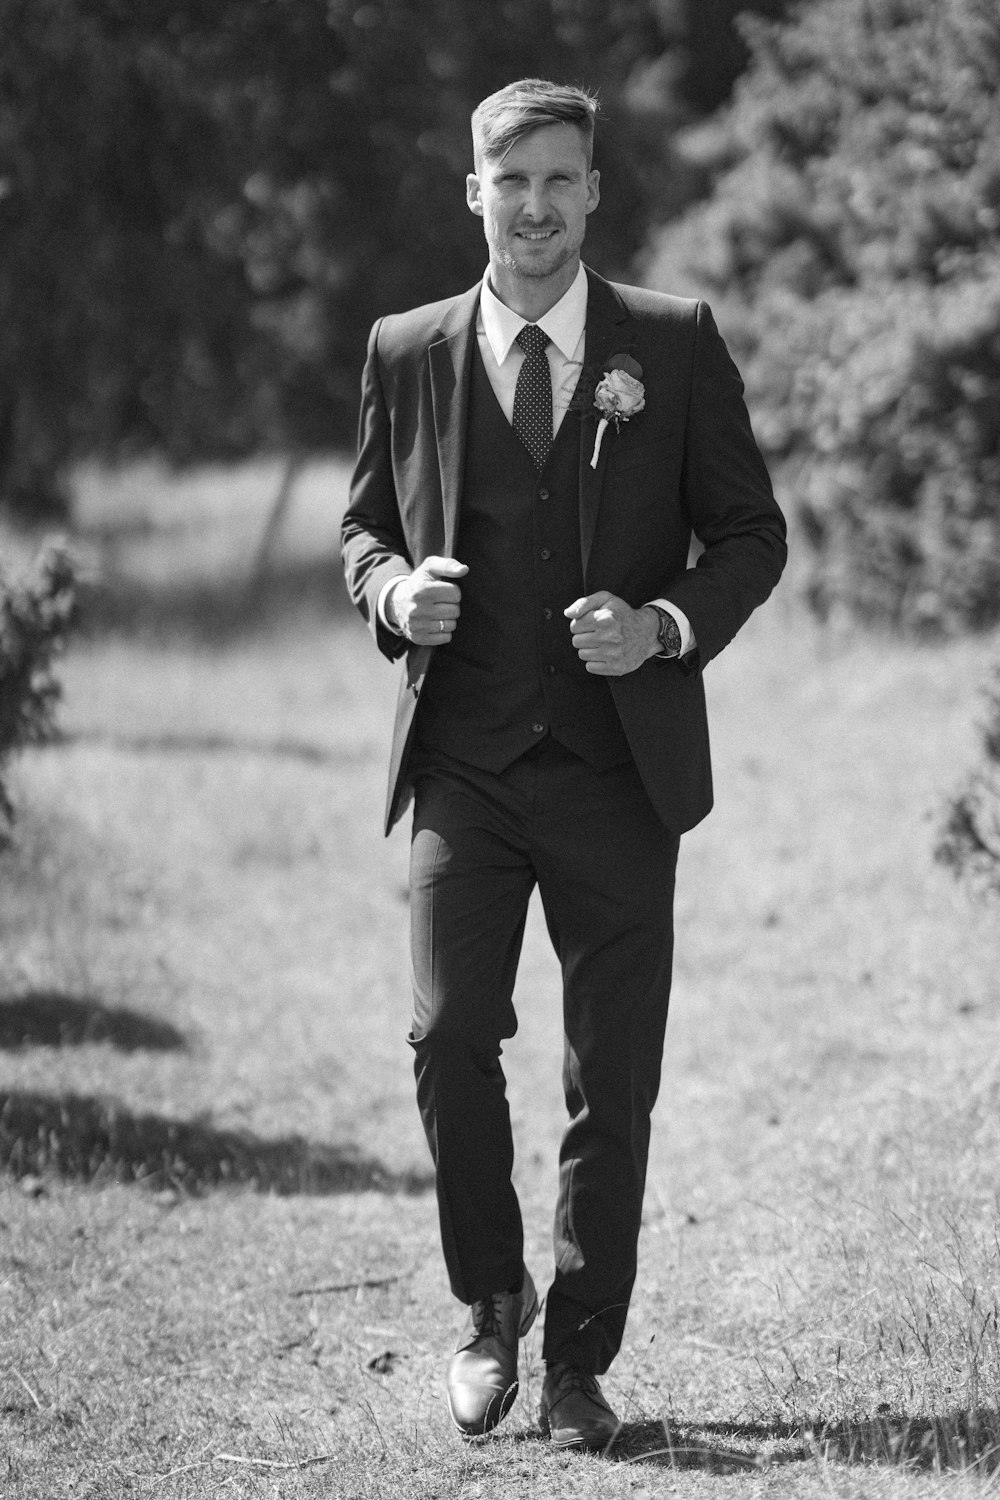 a man in a suit and tie walking in a field